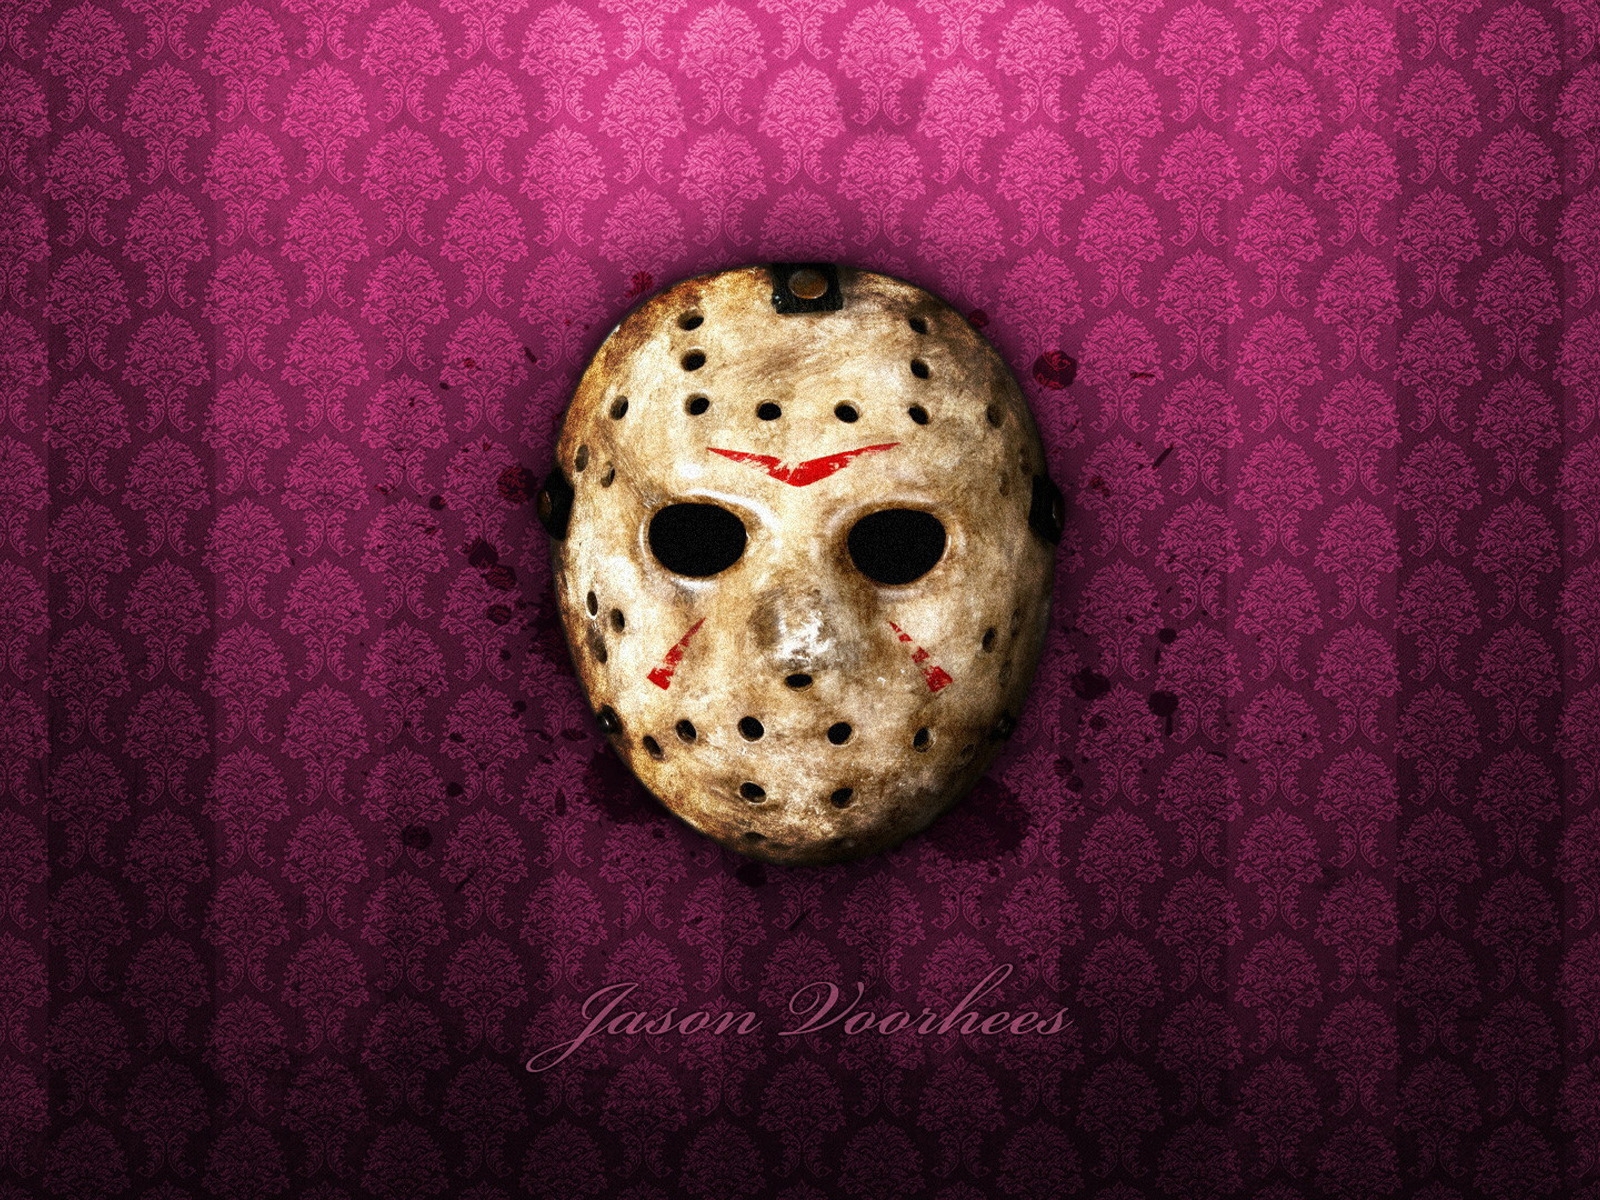 Jason Voorhees for 1600 x 1200 resolution